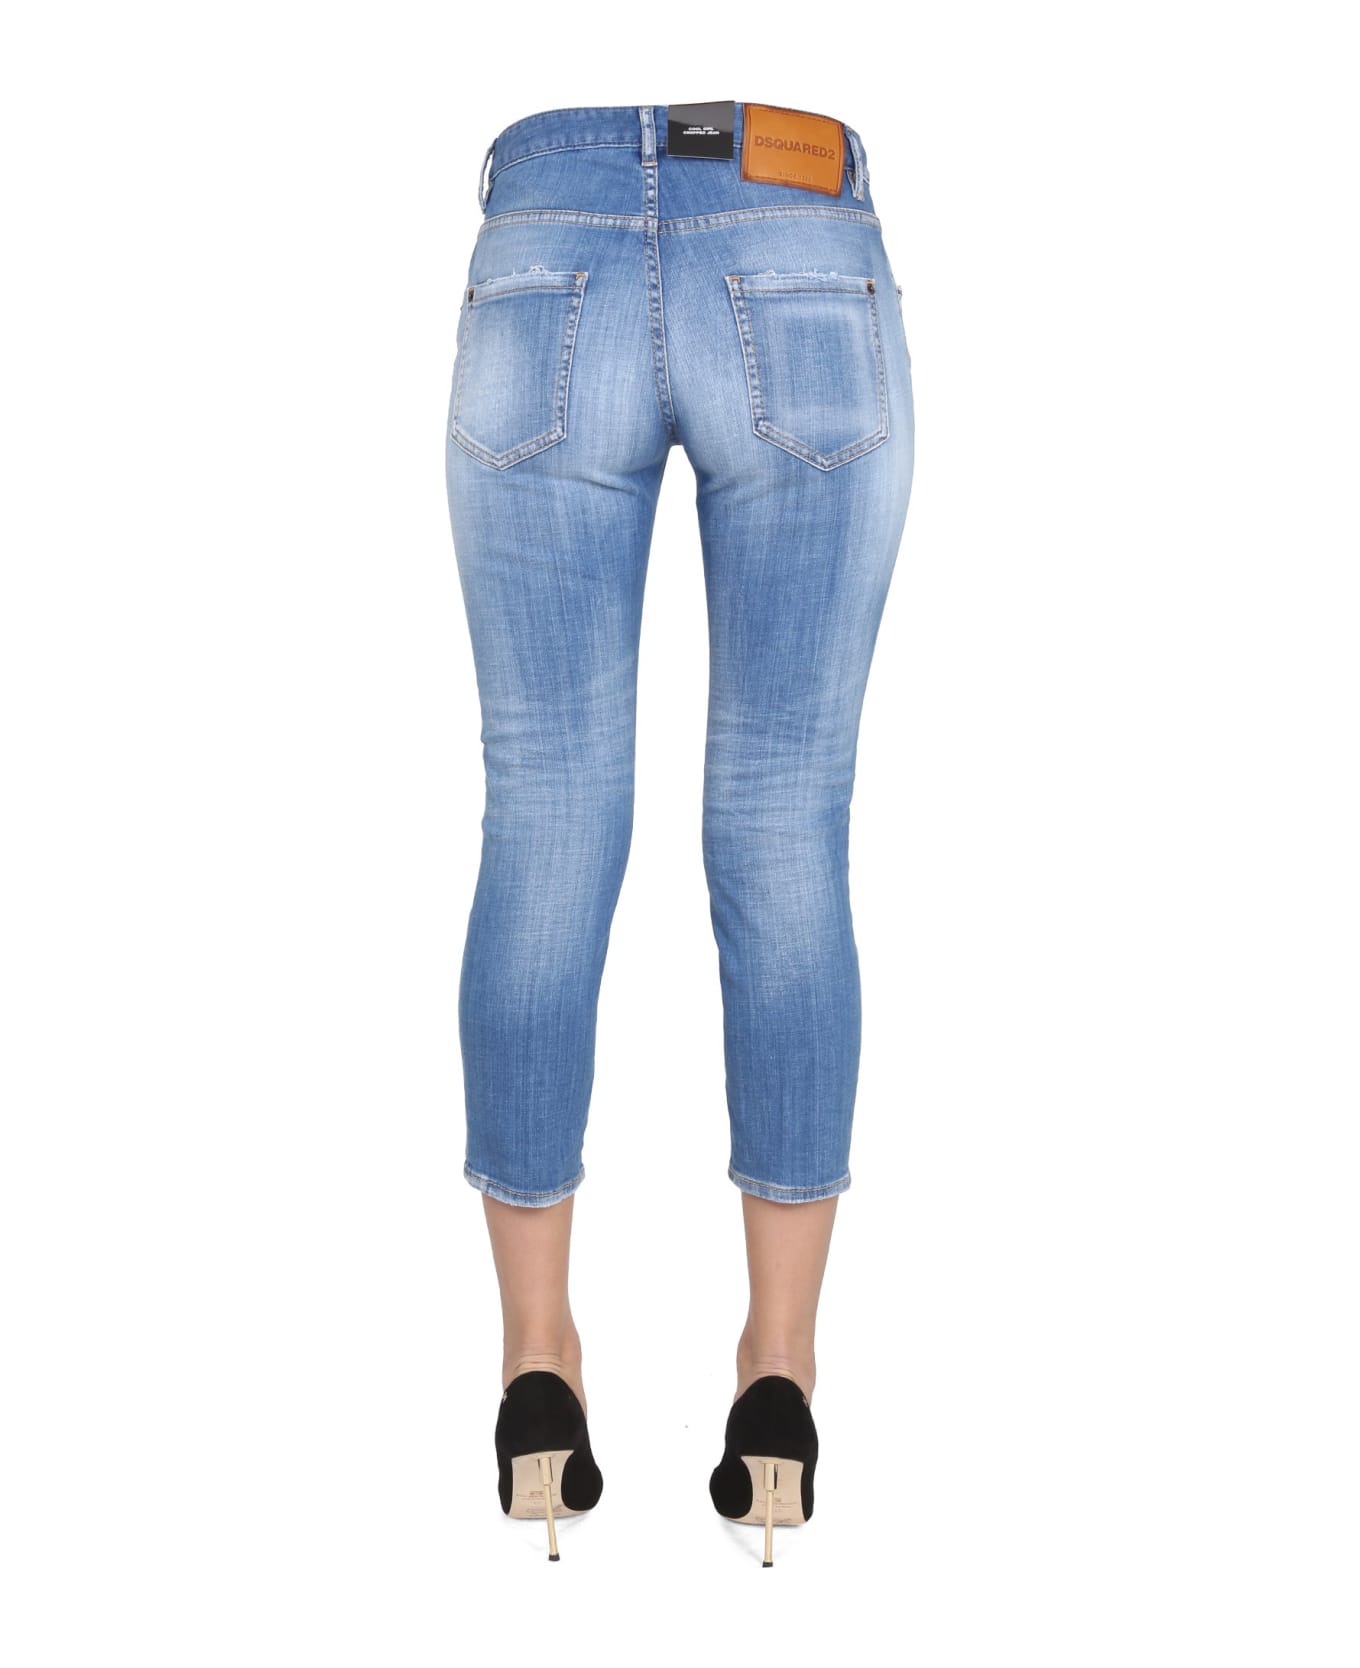 Dsquared2 Cool Girl Cropped Jeans - LIGHT BLUE